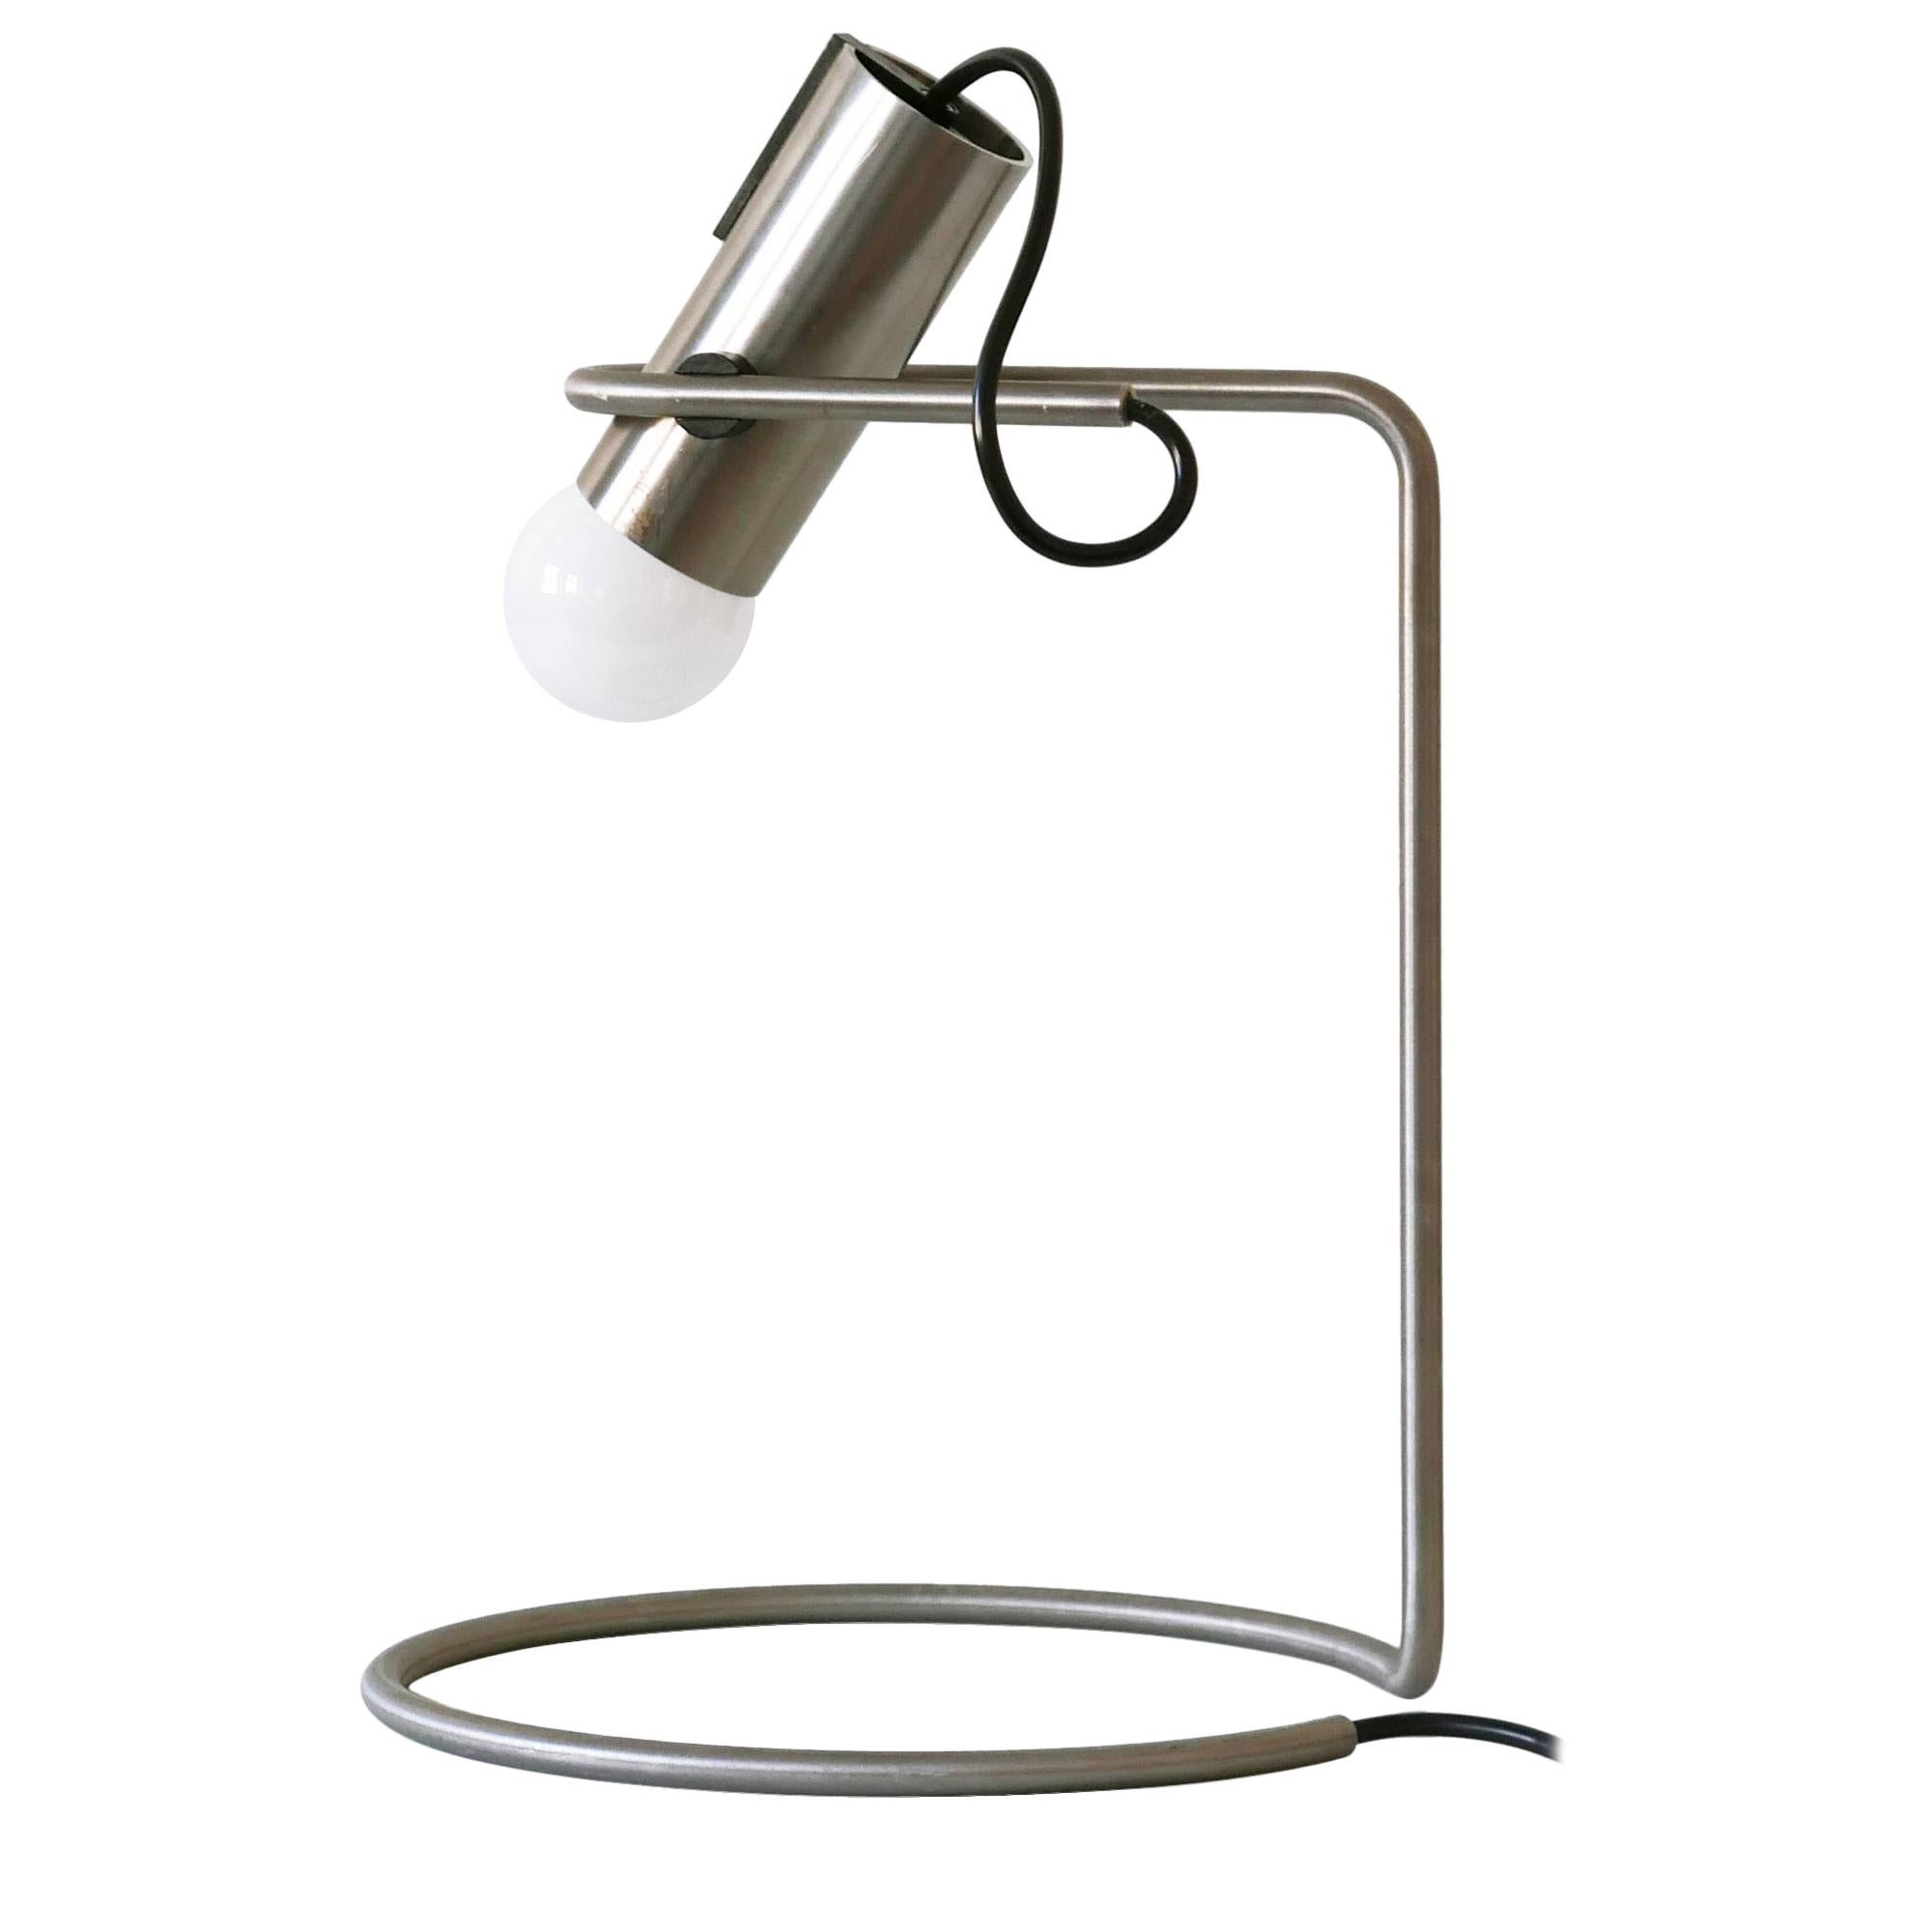 Exceptional Minimalistic Mid-Century Modern Table Lamp or Desk Light, 1960s